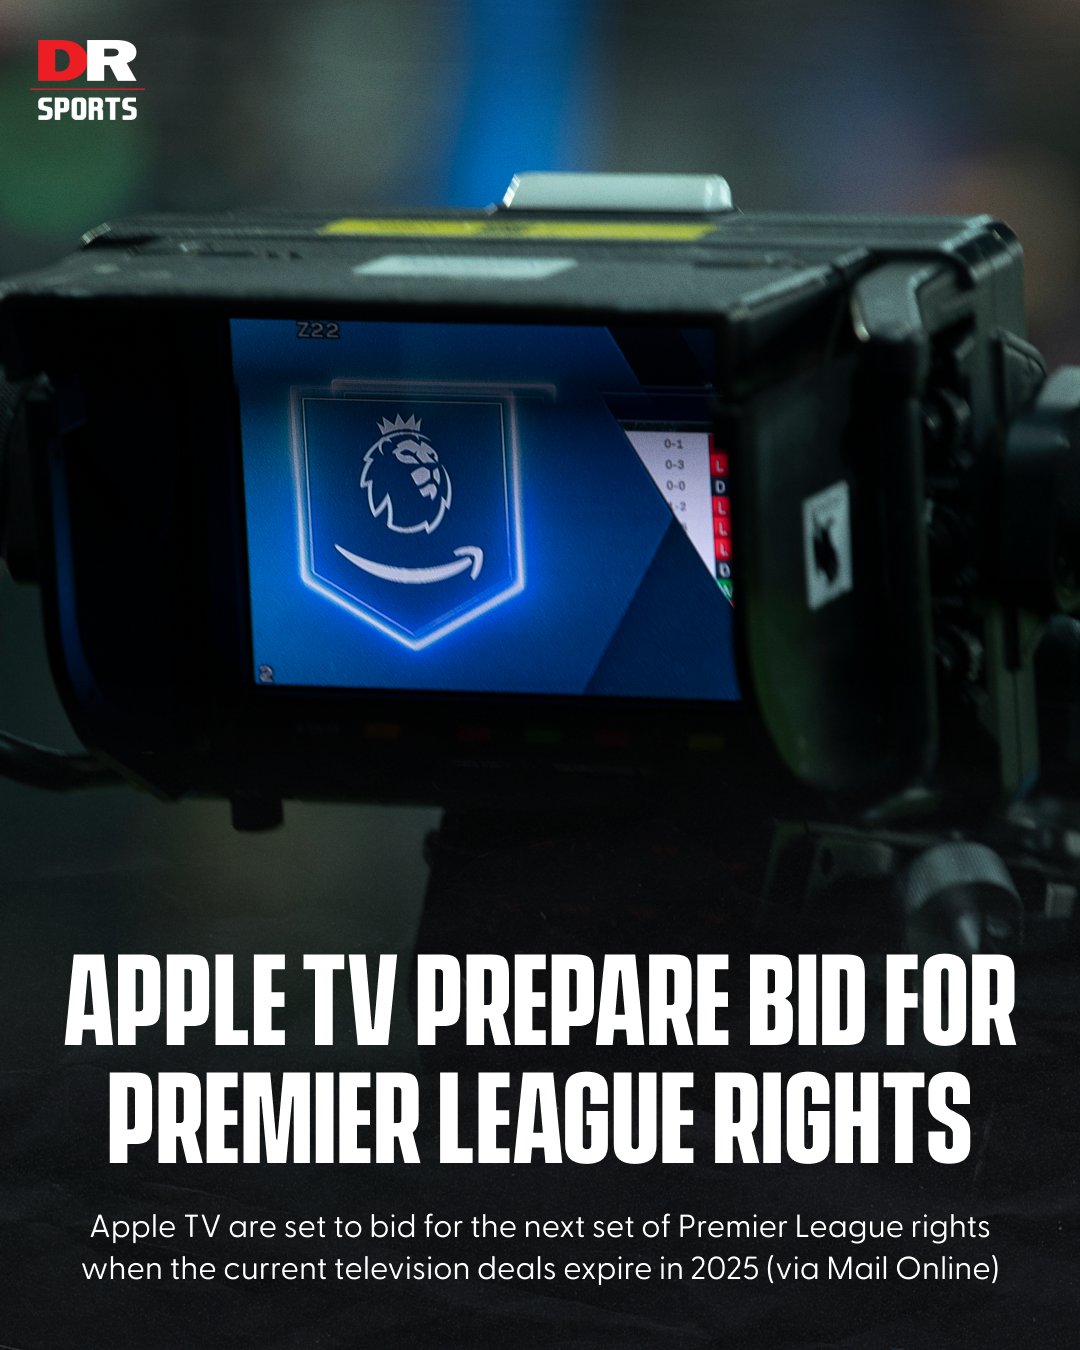 DR Sports on Twitter: "Apple TV want the Premier League rights after securing 10-year MLS 🎥 #PremierLeague #PL #Apple https://t.co/wuSOX9LgXV" / Twitter